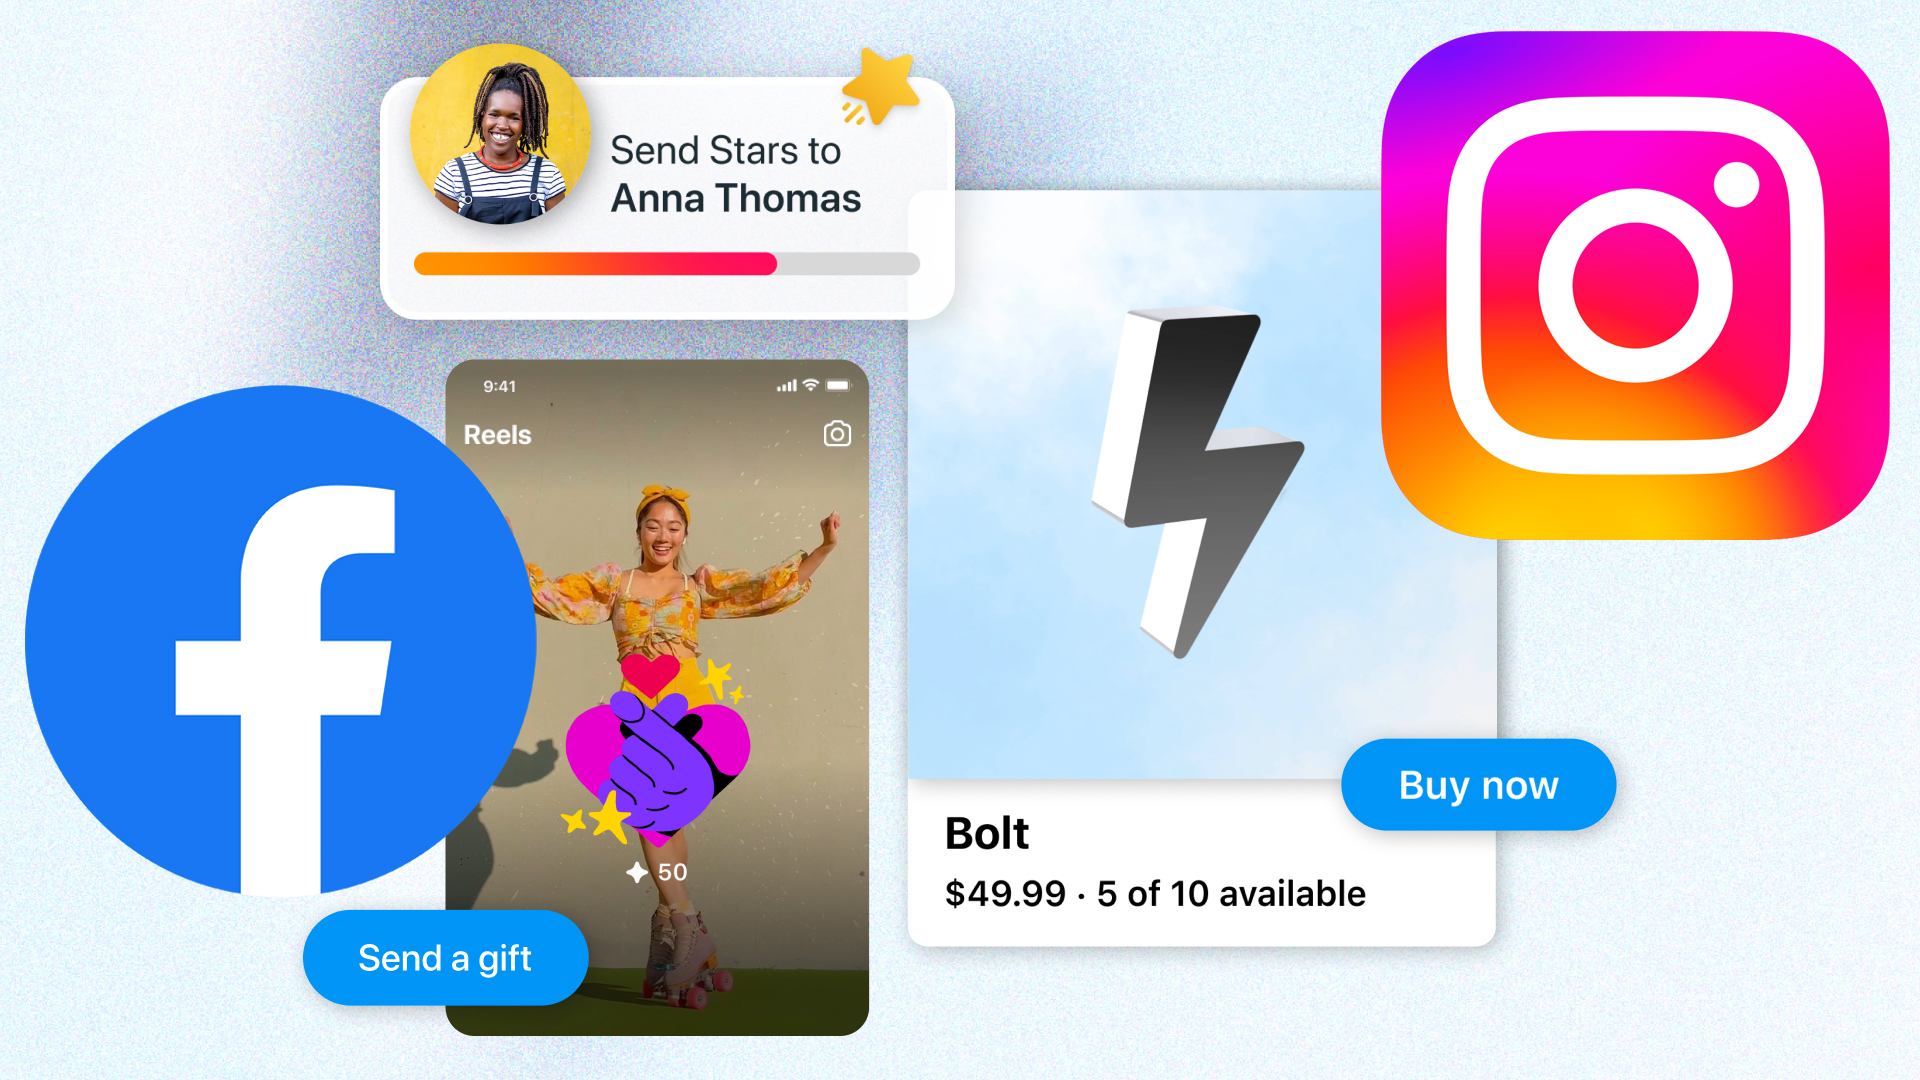 The Facebook and Instagram logos around new paid promotional features